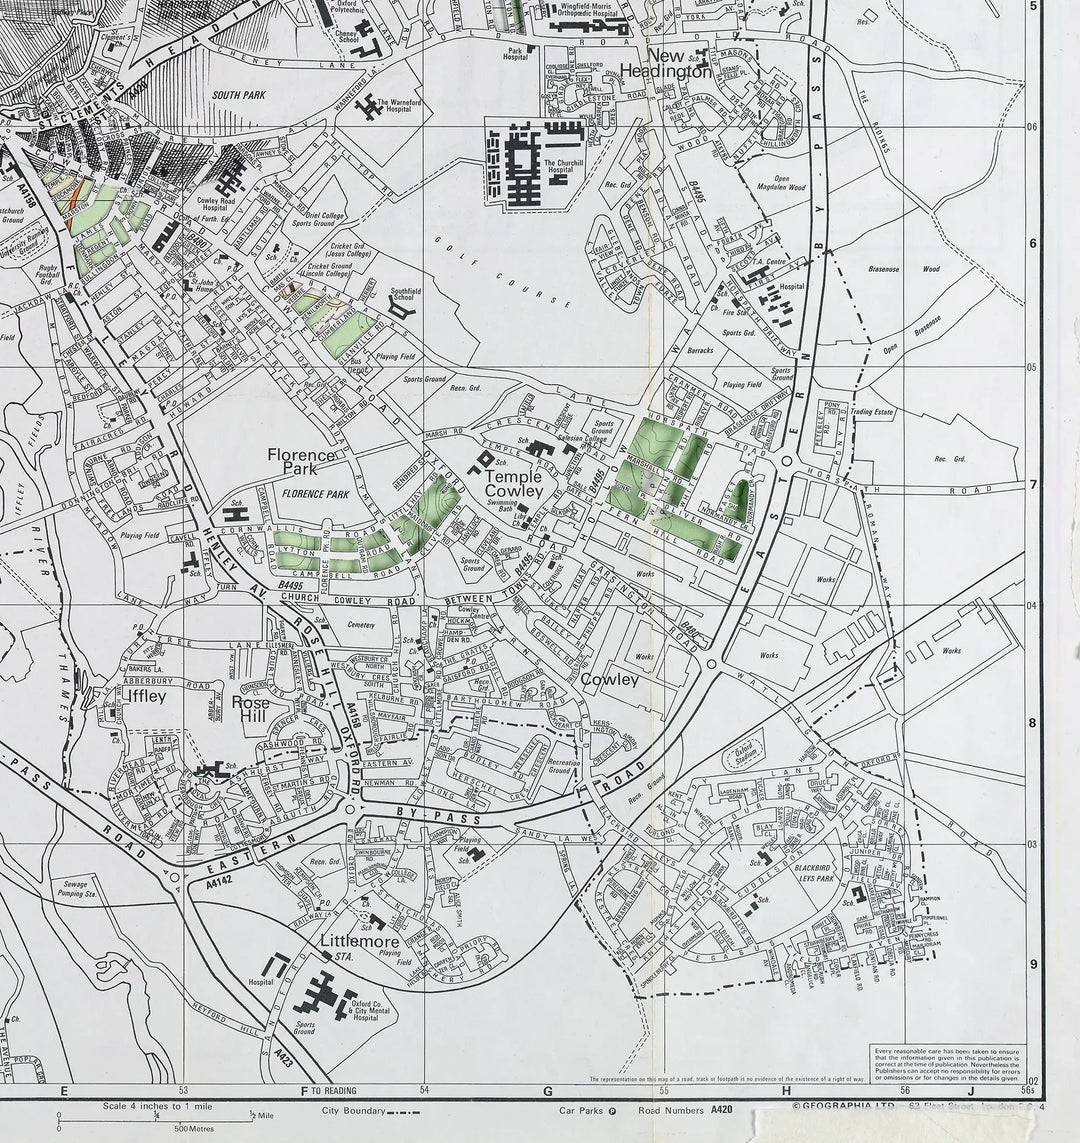 An old map of a city with green areas by Ed Fairburn | "Oxford".